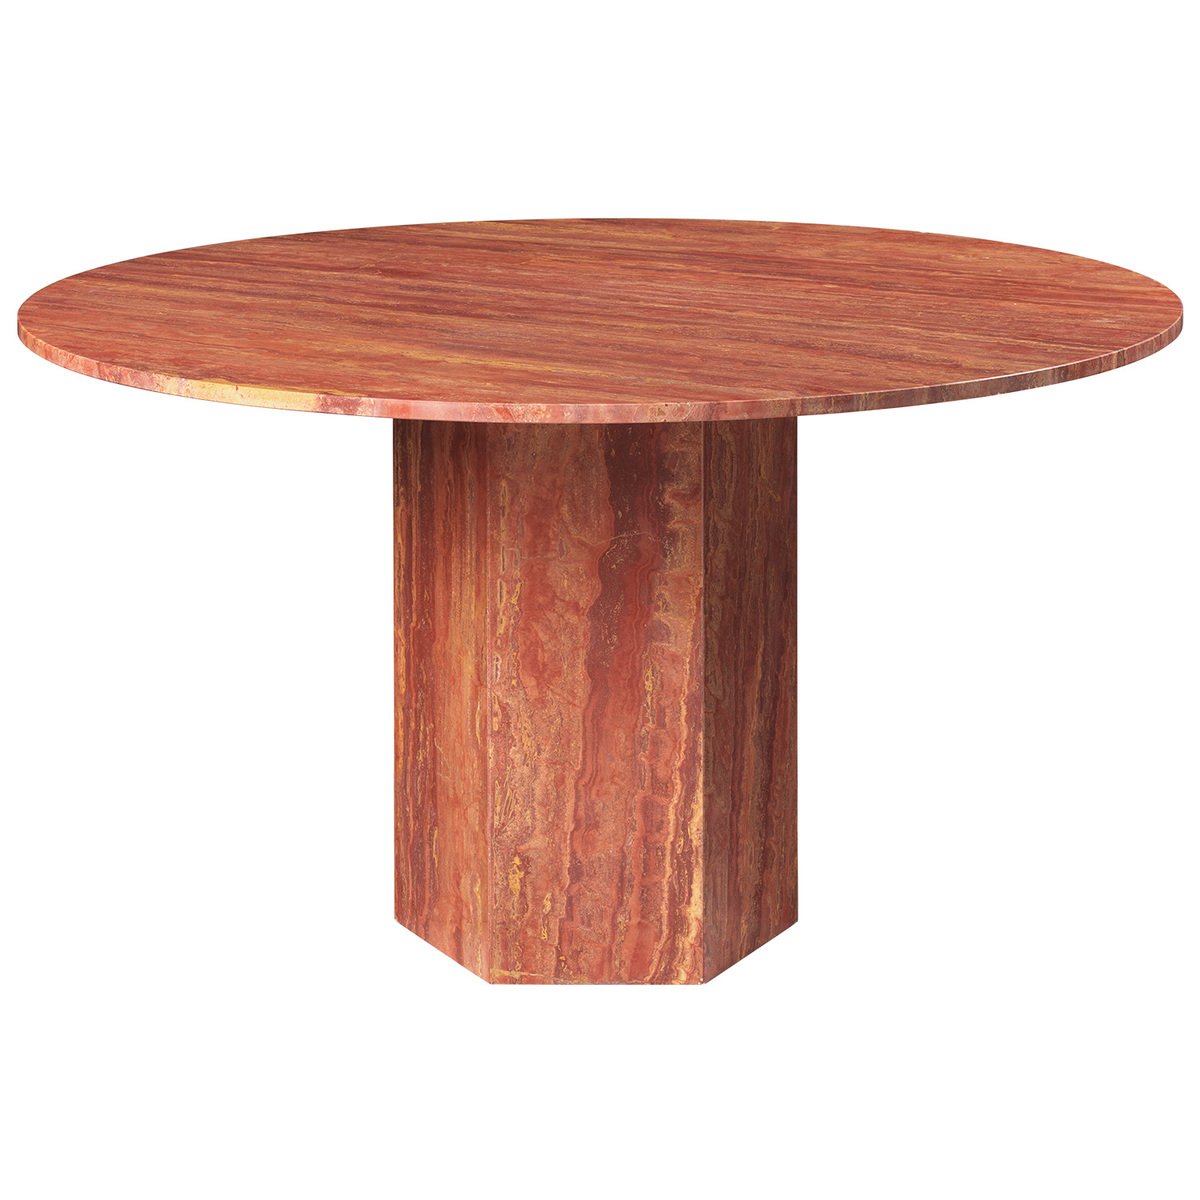 Gubi Epic Dining Table Round 130 Cm, Travertine Top Coffee Table Round